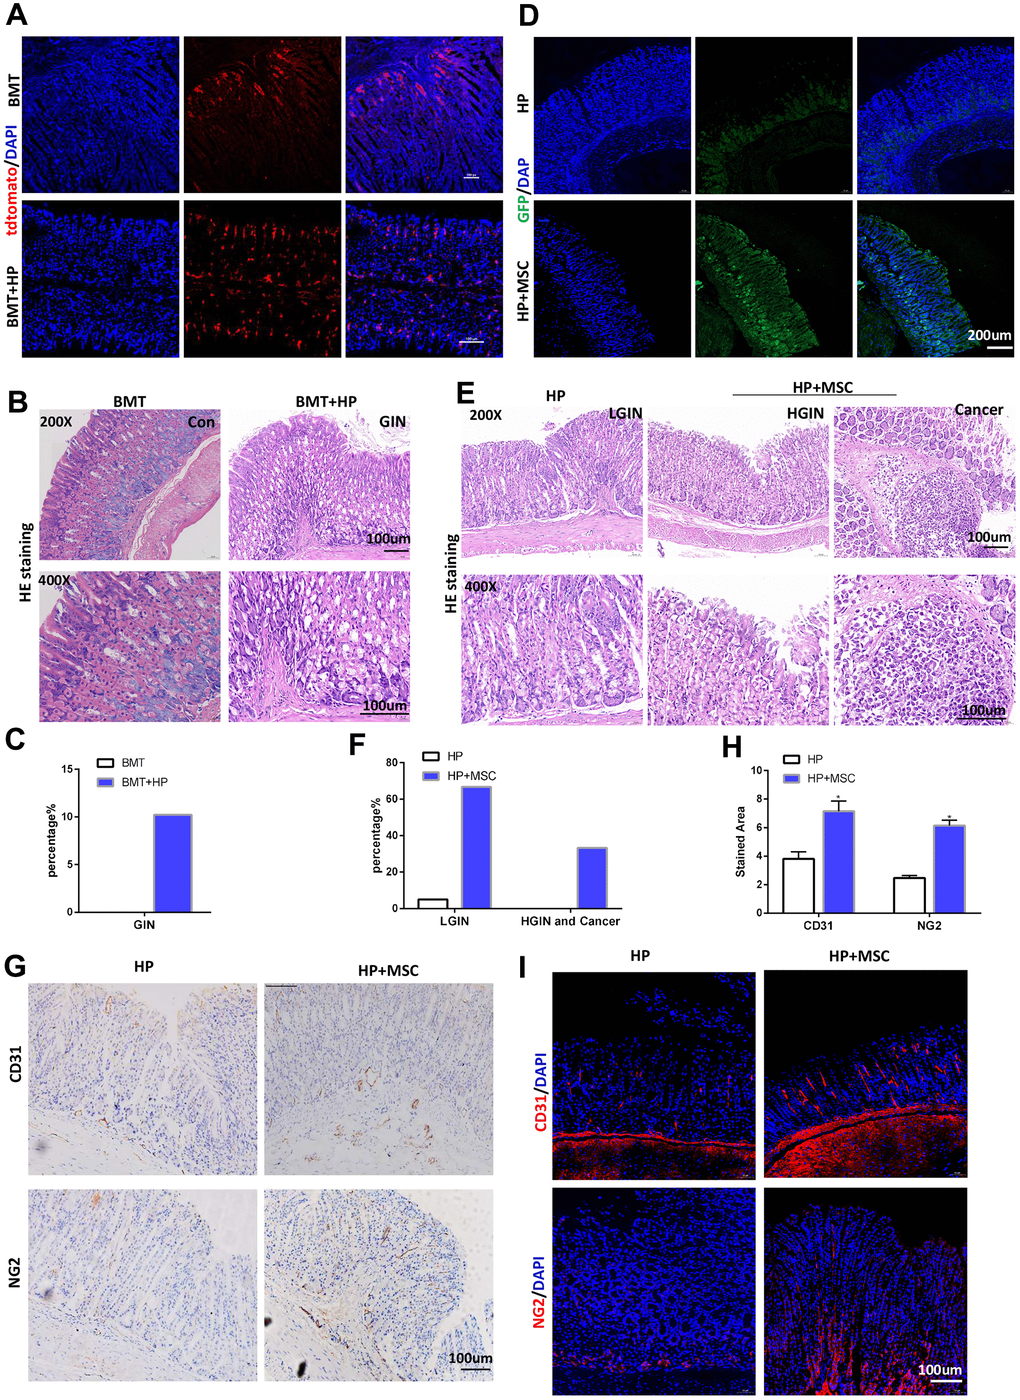 BM-MSCs promote tumorigenicity and angiogenesis in H. pylori-induced GC. (A) In BMT mice, engraftment of LSL-tdTomato marrow-derived cells in mouse gastric tissues was tracked with tdTomato staining. n= 4. (B) Representative gastric mucosa histopathology of gastric intraepithelial neoplasia (GIN) in BMT mice. (C) Quantification of GIN in B. (D) IF of GFP in H. pylori-infected stomachs transplanted with GFP-labeled BM-MSCs. (E) Representative gastric mucosa histopathology in H. pylori-infected stomachs with (H. pylori+ MSC) or without (H. pylori) BM-MSC transplantation. n= 30 mice in each group. (F) Quantification of dysplasia and GC in D. (G) IHC of CD31 and NG2 in H. pylori or H. pylori+ MSC group. (H) Quantification of F. Multiple fields (at least six) from three different mice were analyzed. (I) IF of CD31 and NG2 in H. pylori or H. pylori+ MSC group. Cell nuclei, DAPI; CD31, Cy3; NG2, Cy3. HP: H. pylori. MSC: bone marrow-derived mesenchymal stem cells. IF: immunofluorescence. The results are shown as the mean ± SD. *, P 